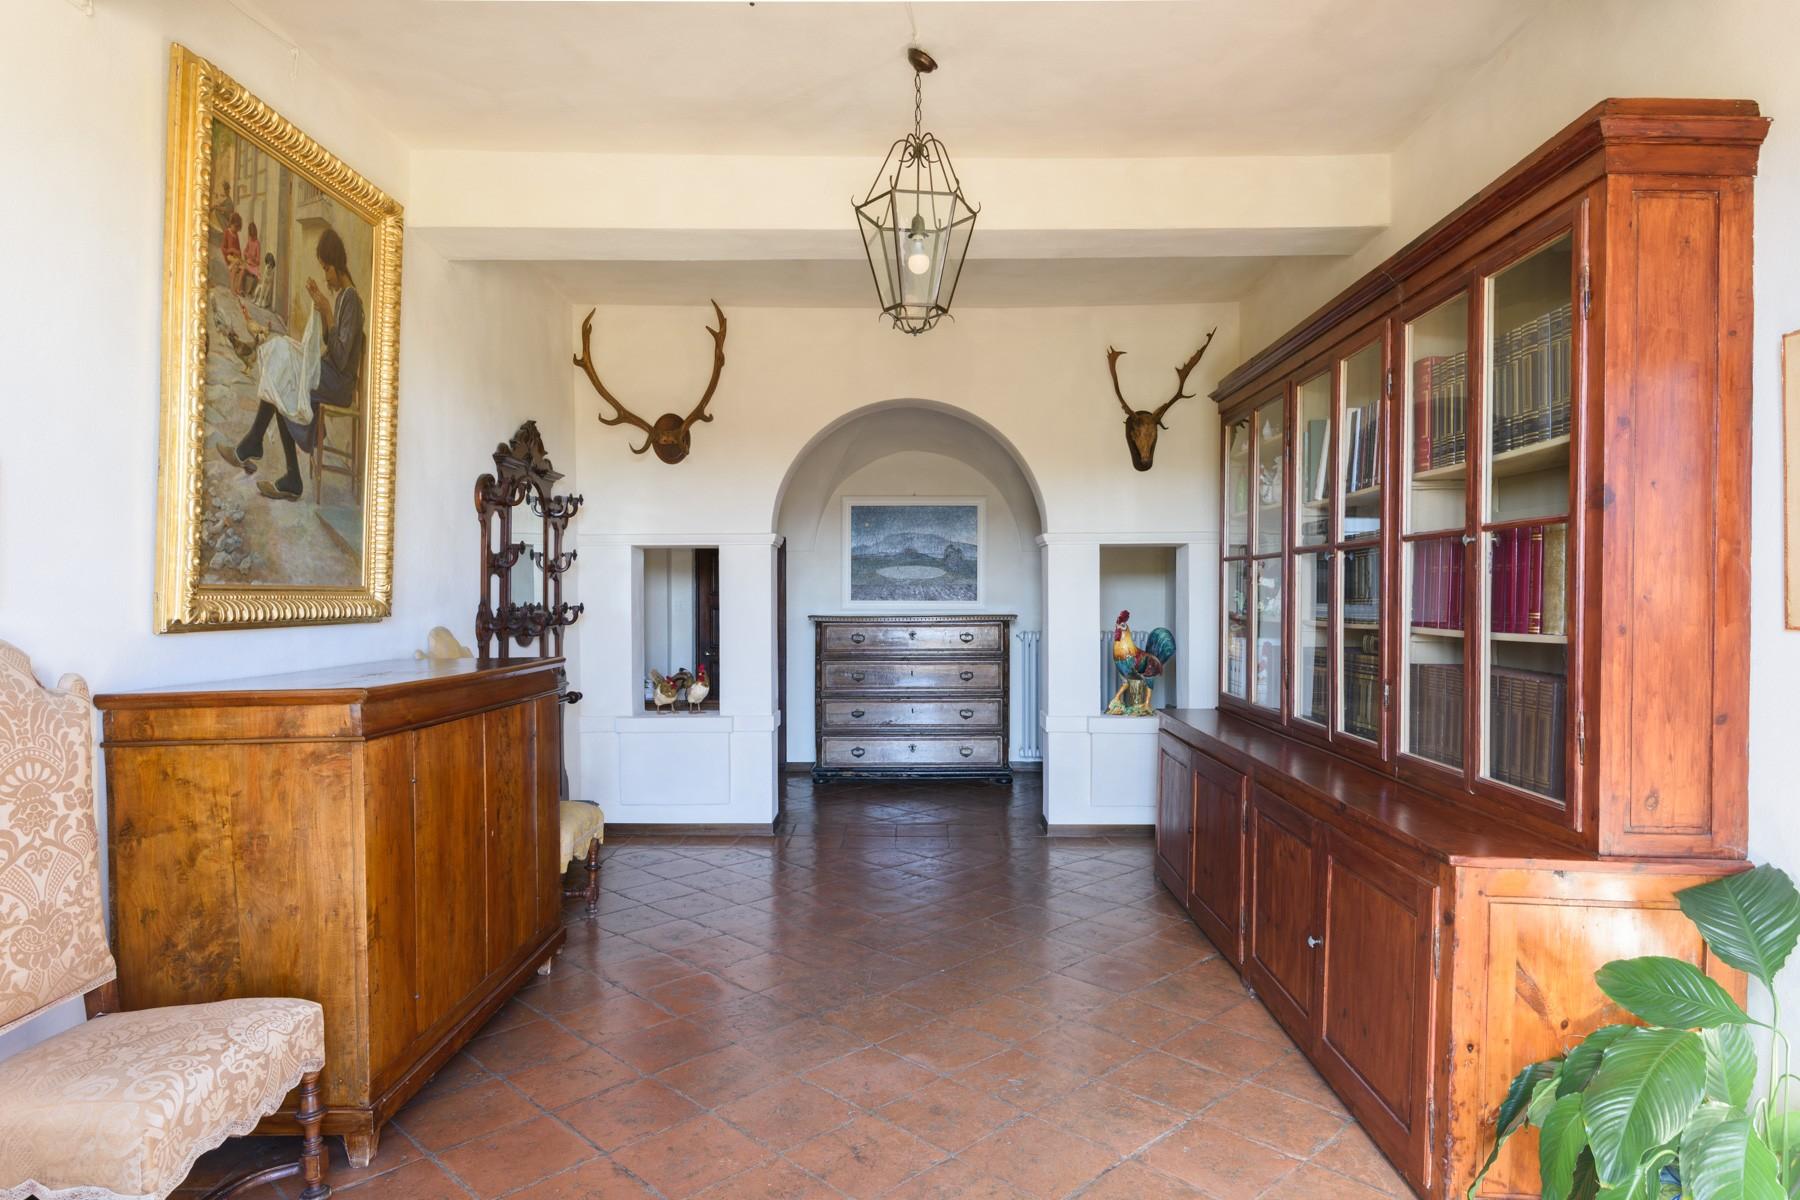 Wonderful villa surrounded by historic hamlet and hunting reserve - 3